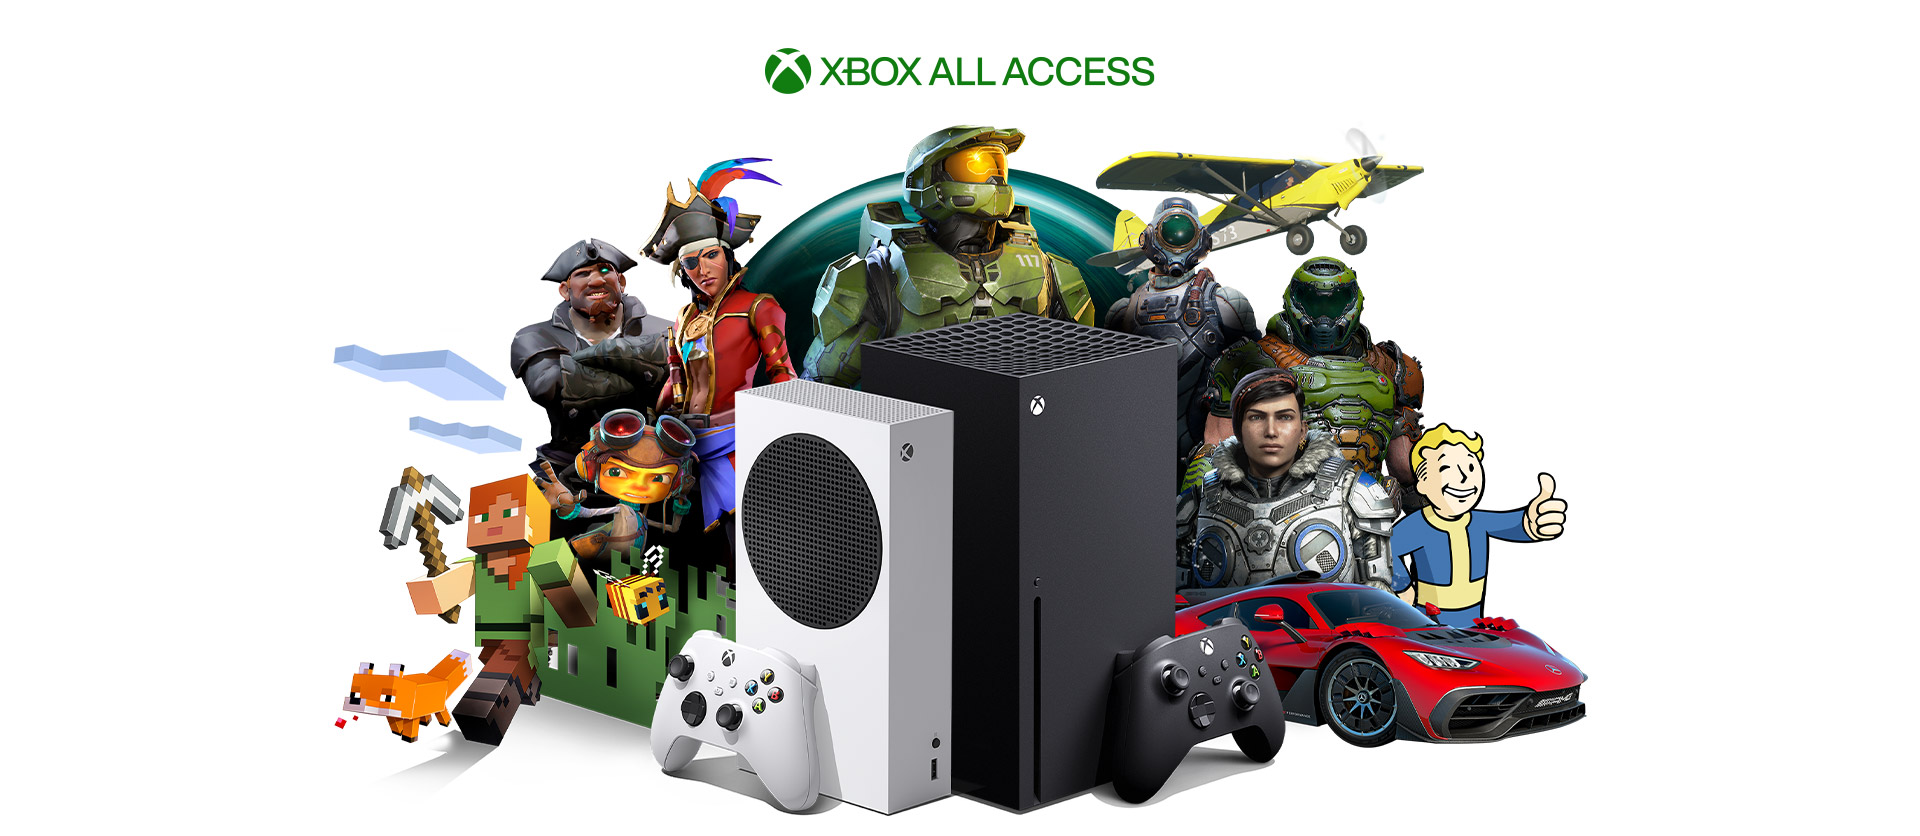 Xbox All Access, Xbox Series X and Xbox Series S with Xbox game characters